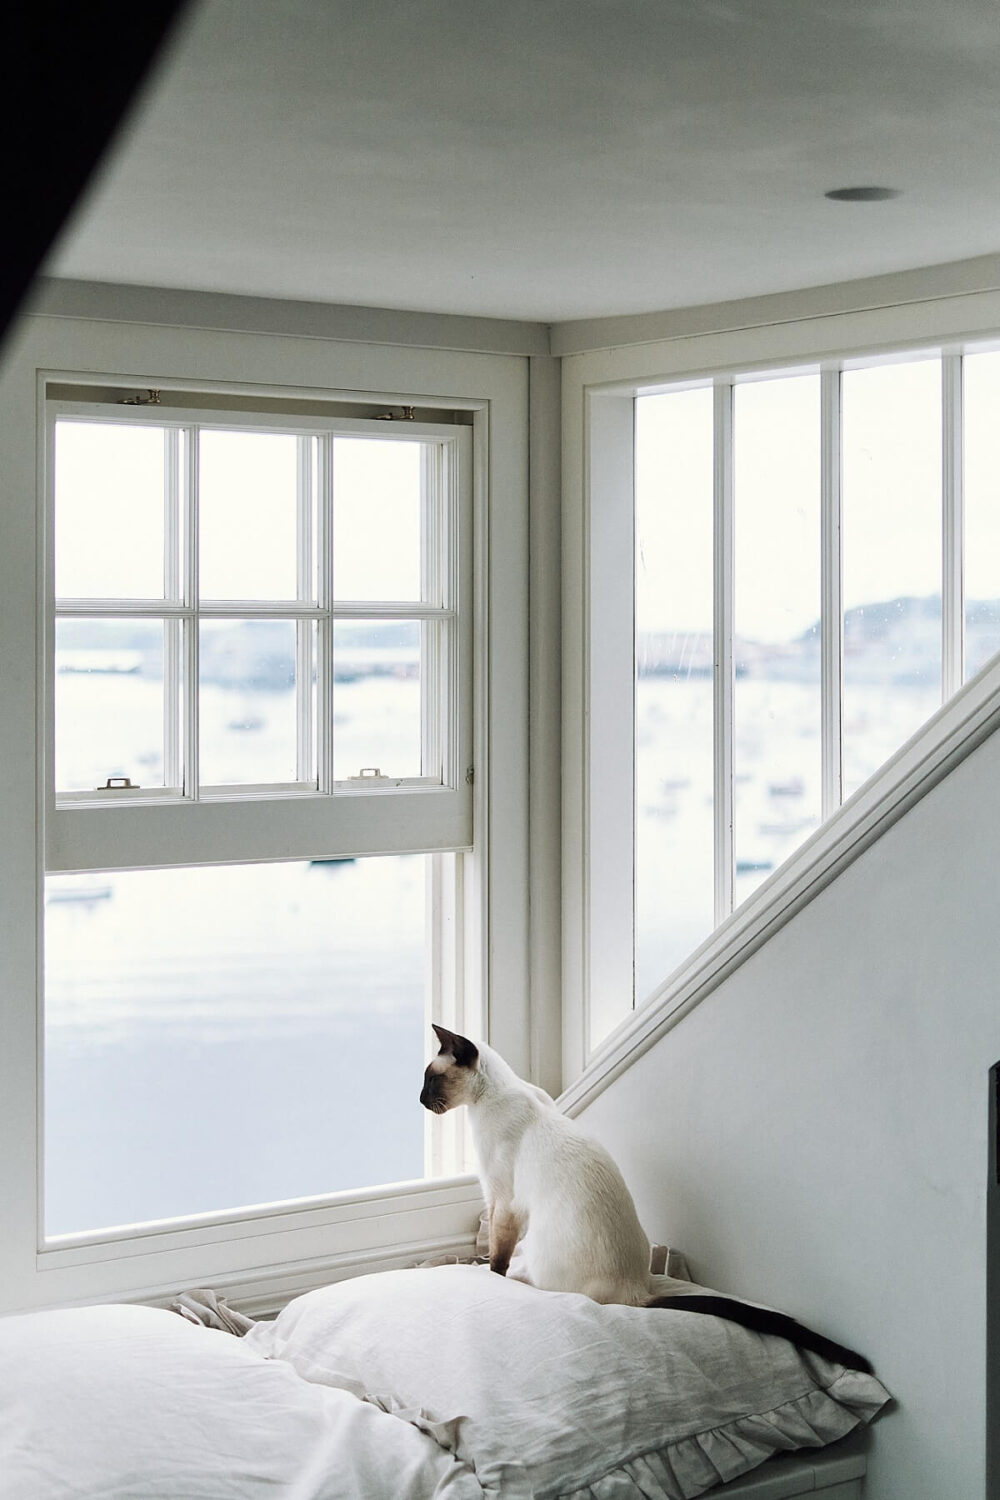 window-seat-overlooking-ocean-falmouth-cornwall-nordroom